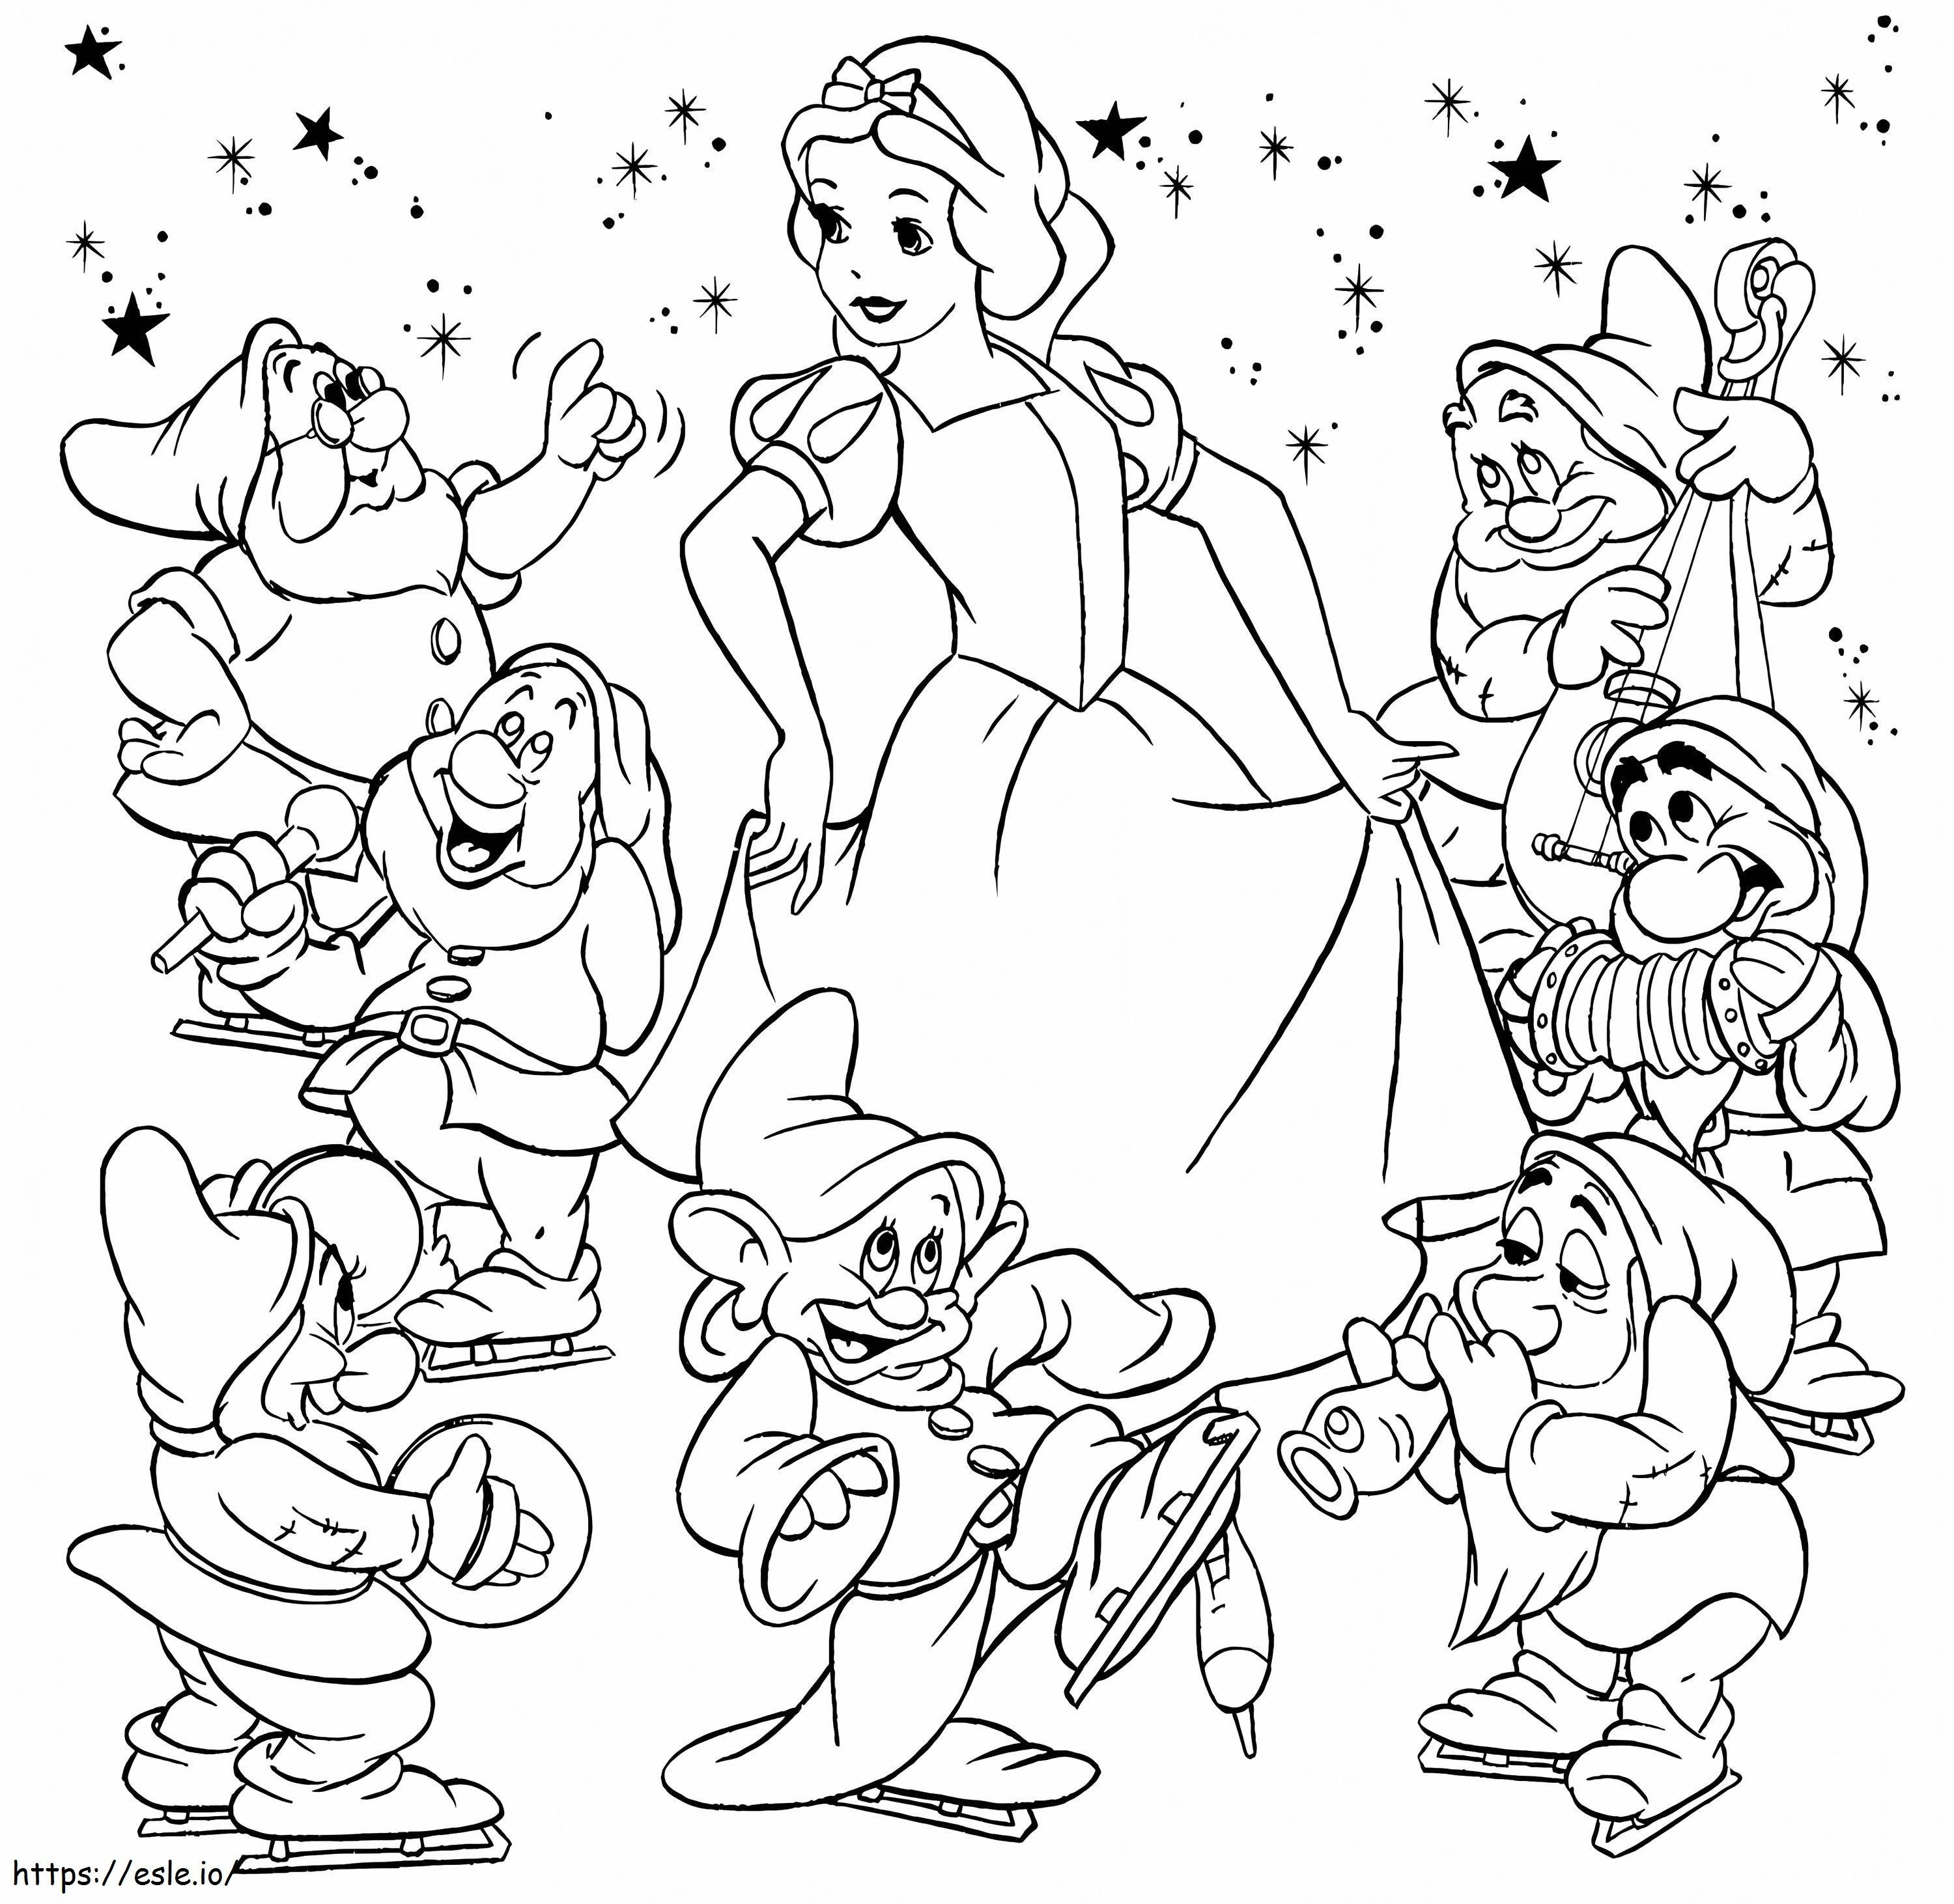 1528341360_Snow White_Coloring_Pages_From_Brooklyn A4 coloring page